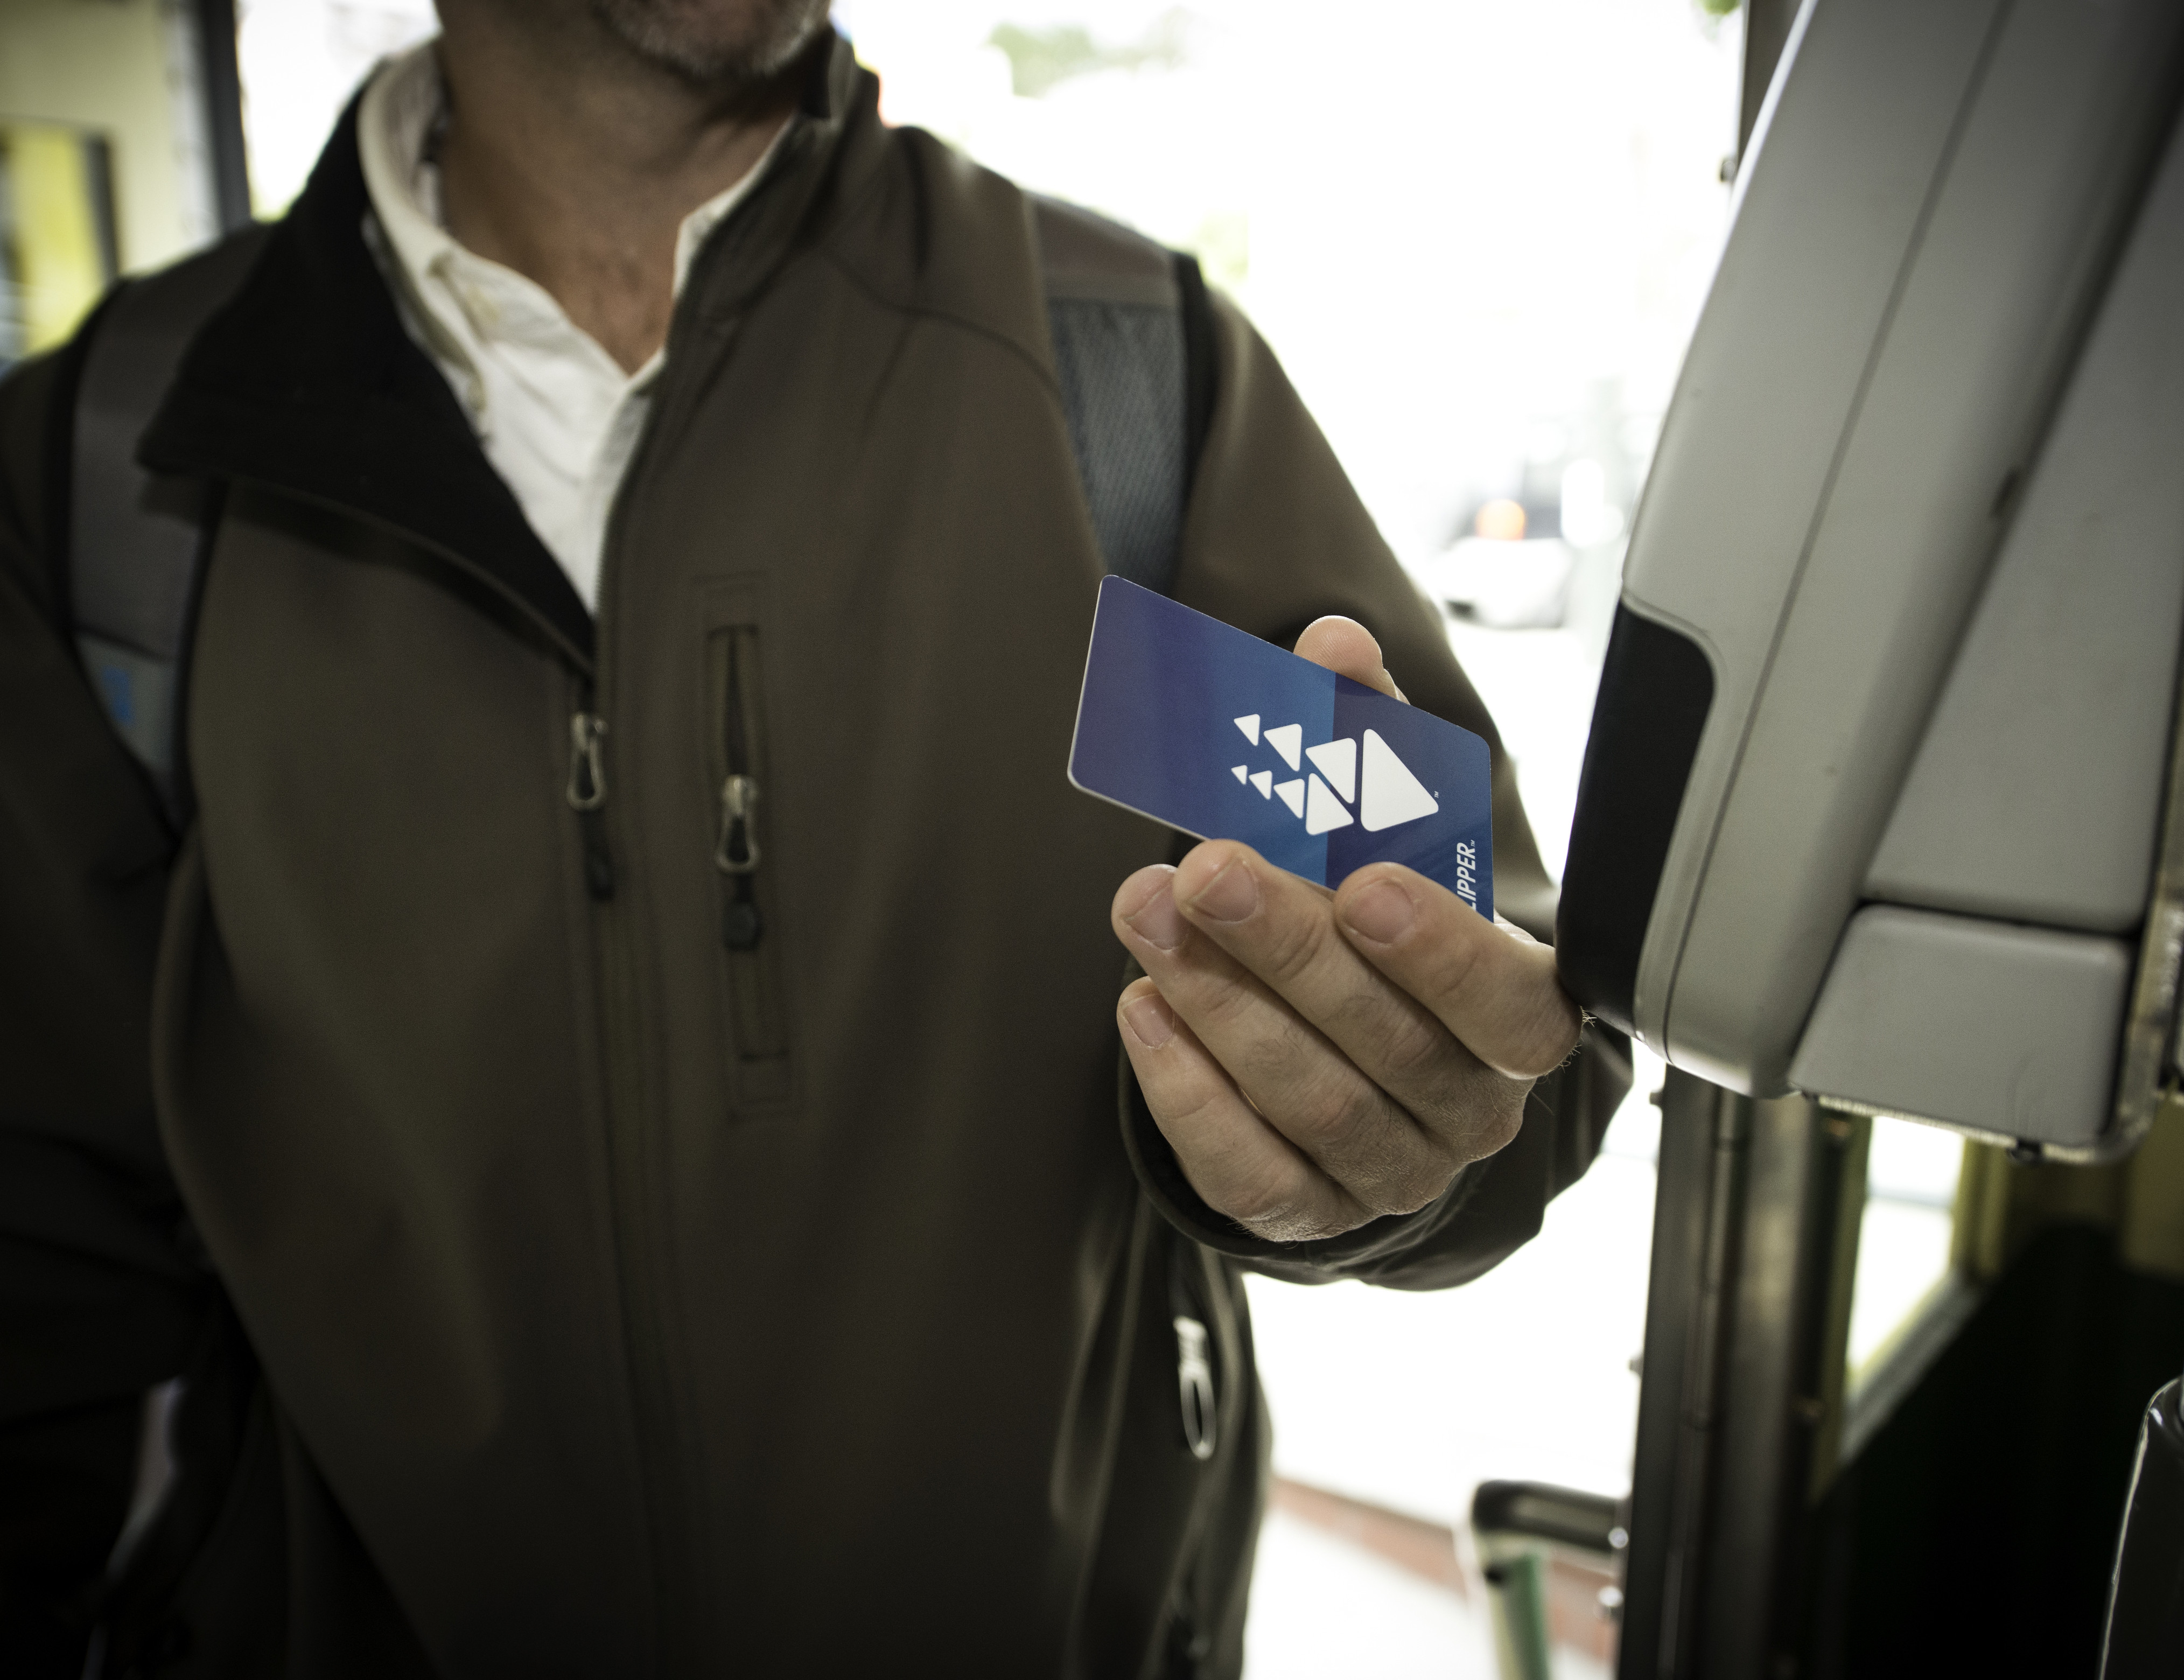 Modern on-board PoP fare payment using an RFID payment card, San Francisco (credit: SFMTA)